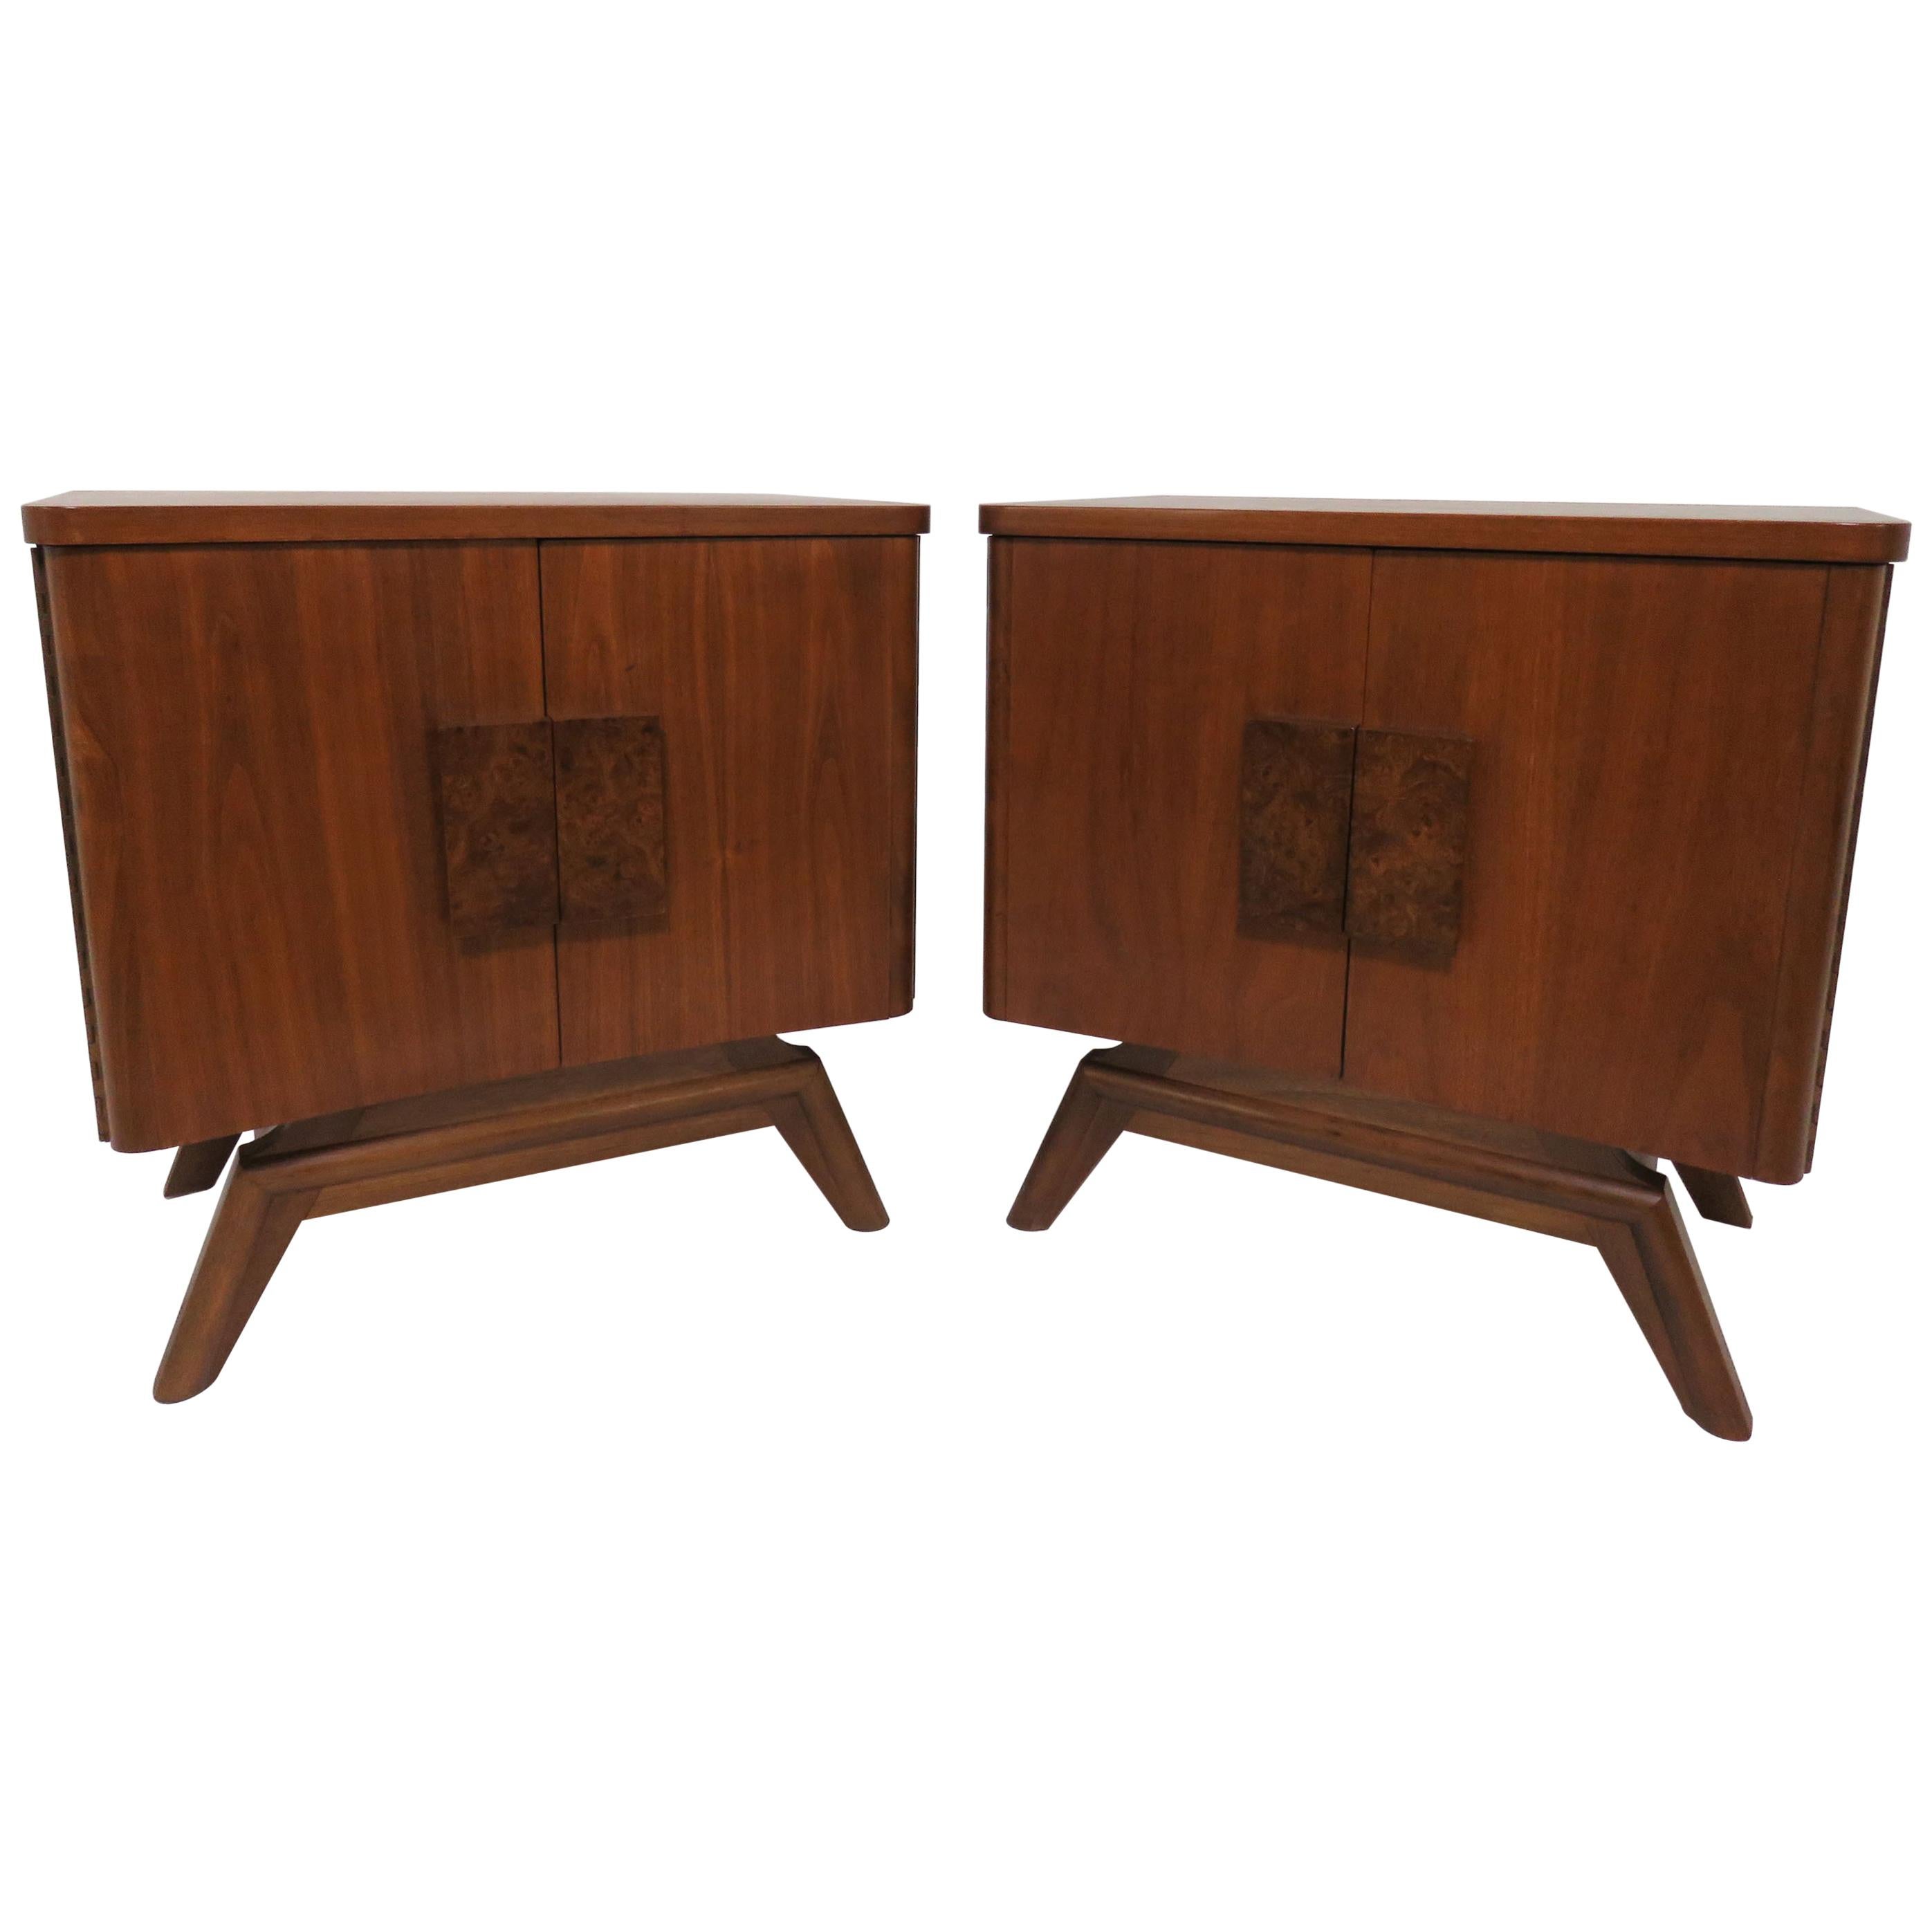 Pair of Mid-Century Modern Night Stands in Walnut and Burl, circa 1960s